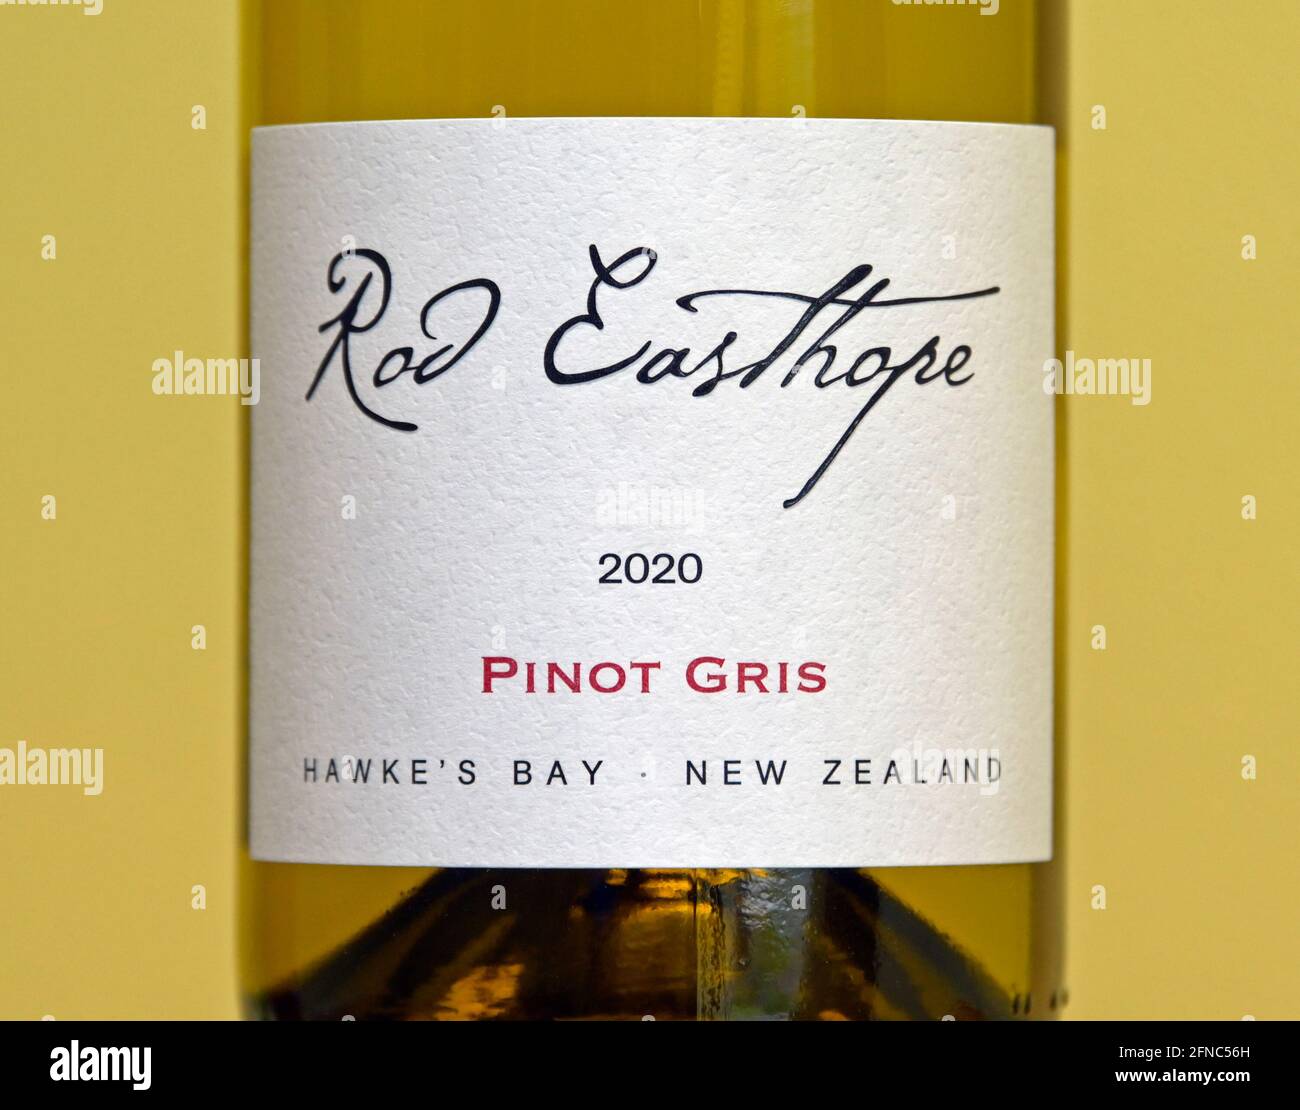 Wine label. Rod Easthope. 2020. Pinot Gris. Hawke's Bay New Zealand. Stock Photo